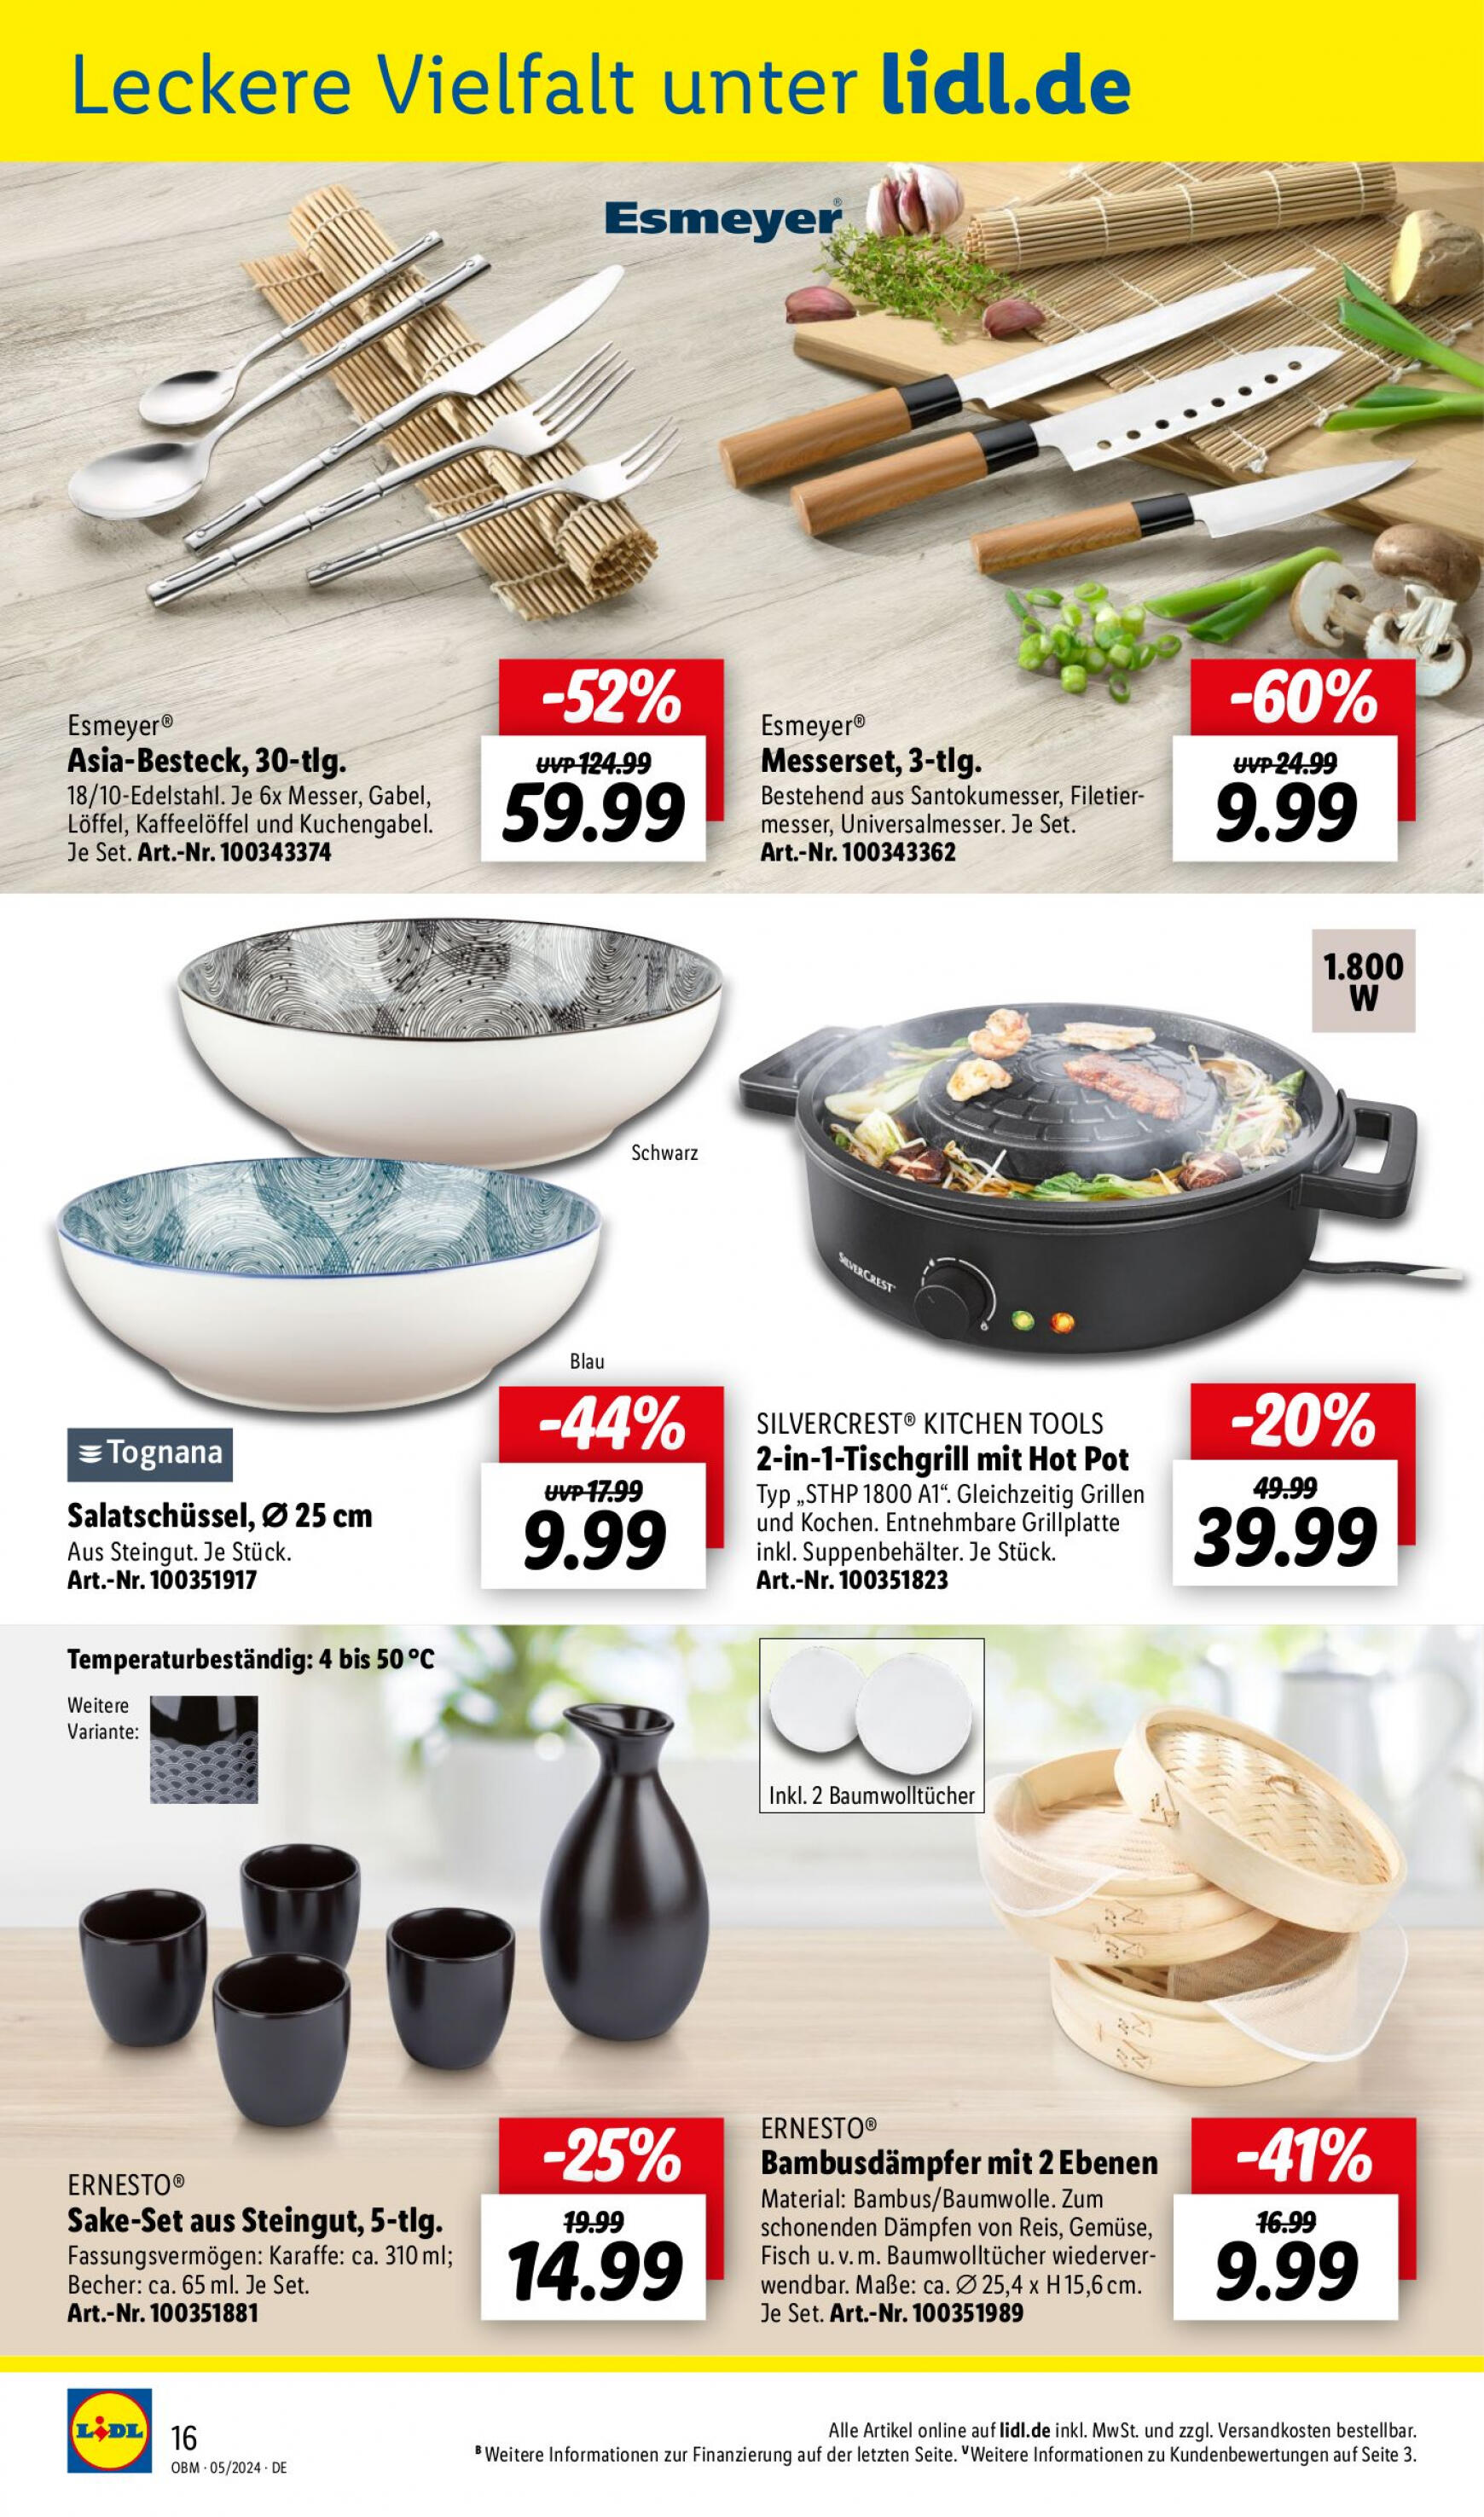 lidl - Flyer Lidl - Aktuelle Onlineshop-Highlights aktuell 01.05. - 31.05. - page: 16